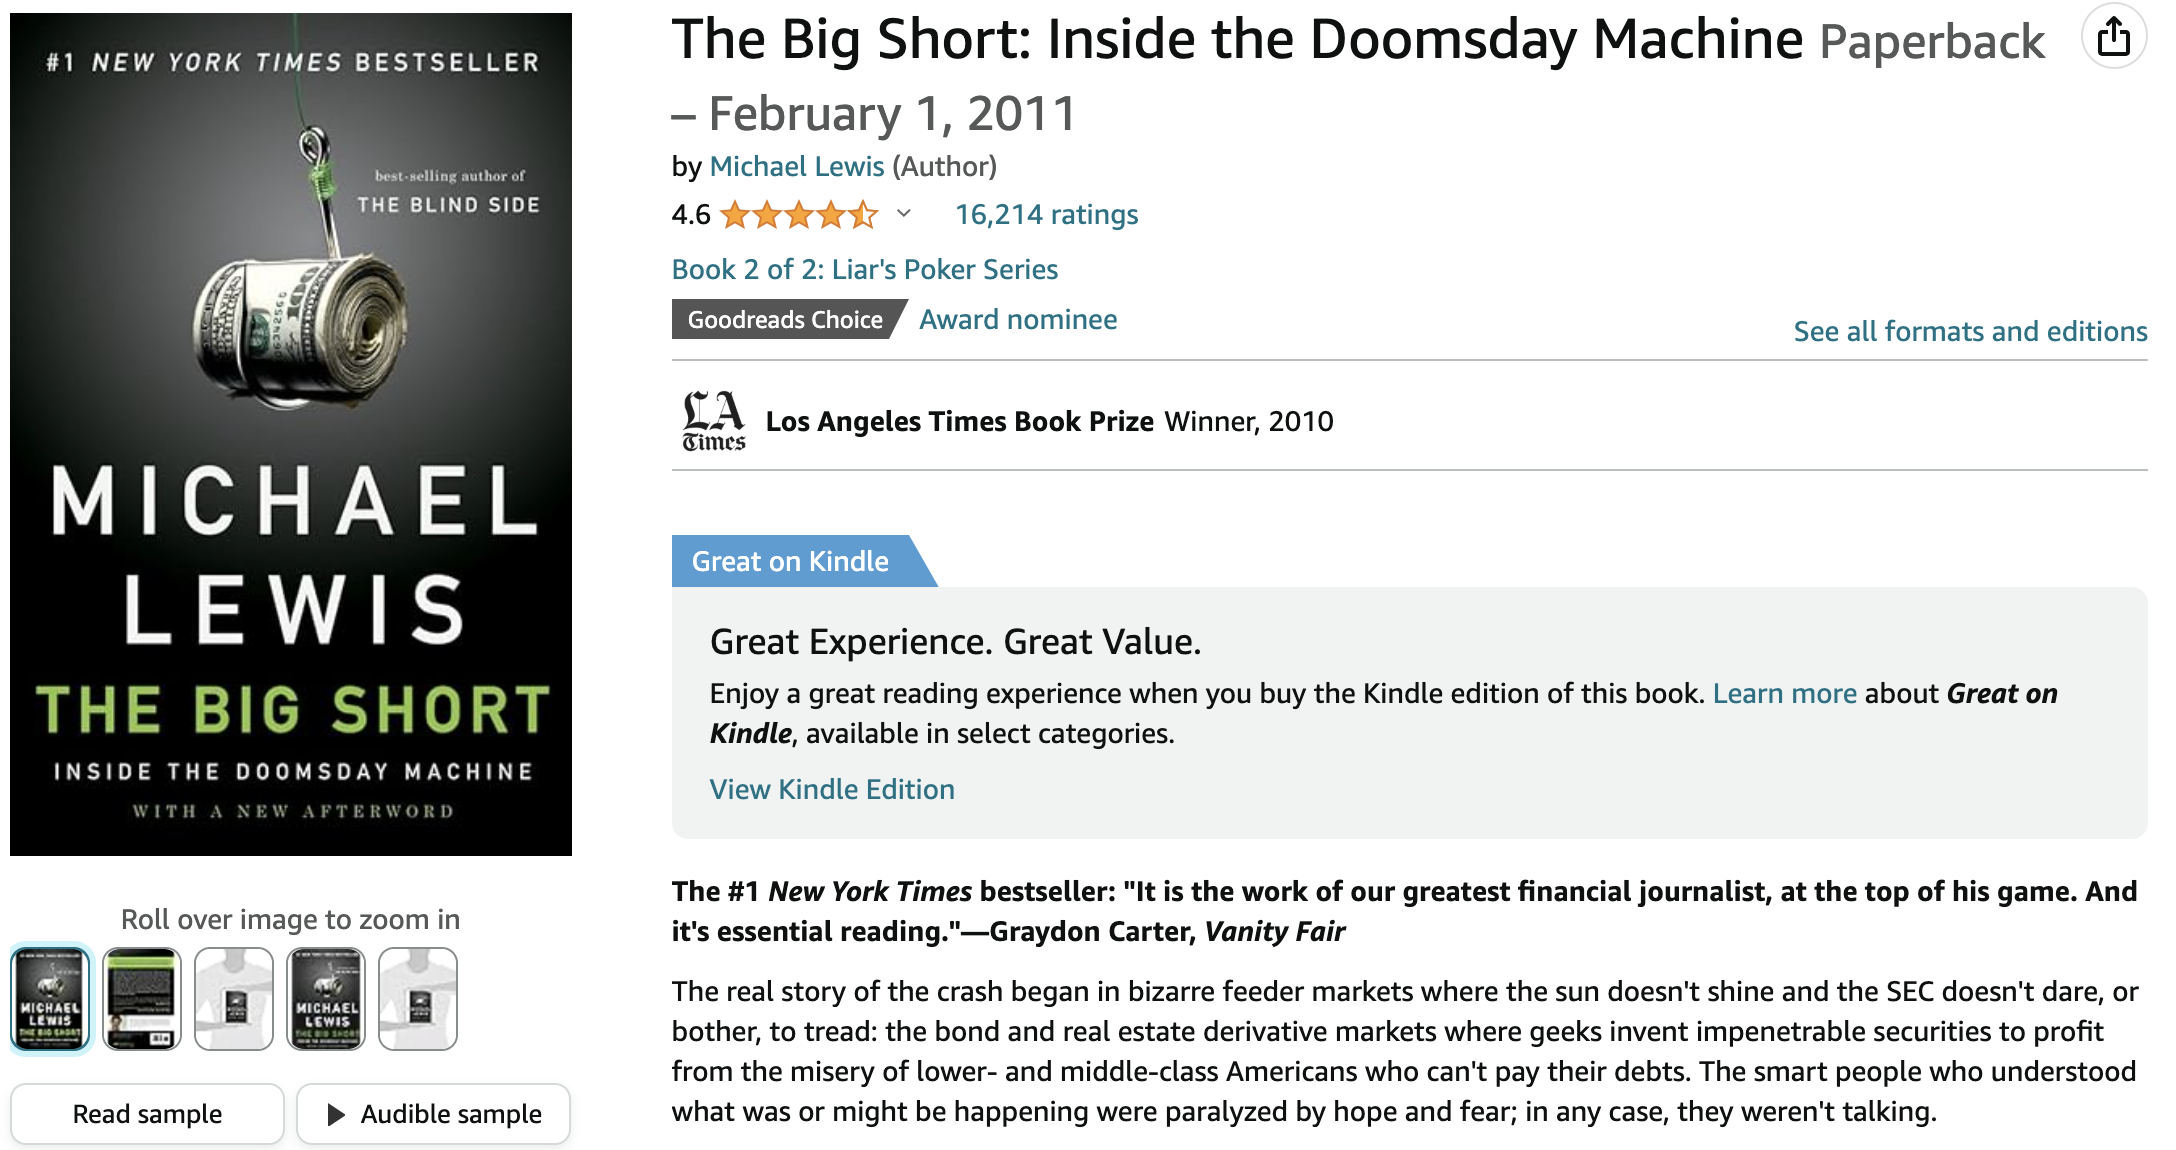 Books for Stock Traders: “The Big Short: Inside the Doomsday Machine” by Michael Lewis